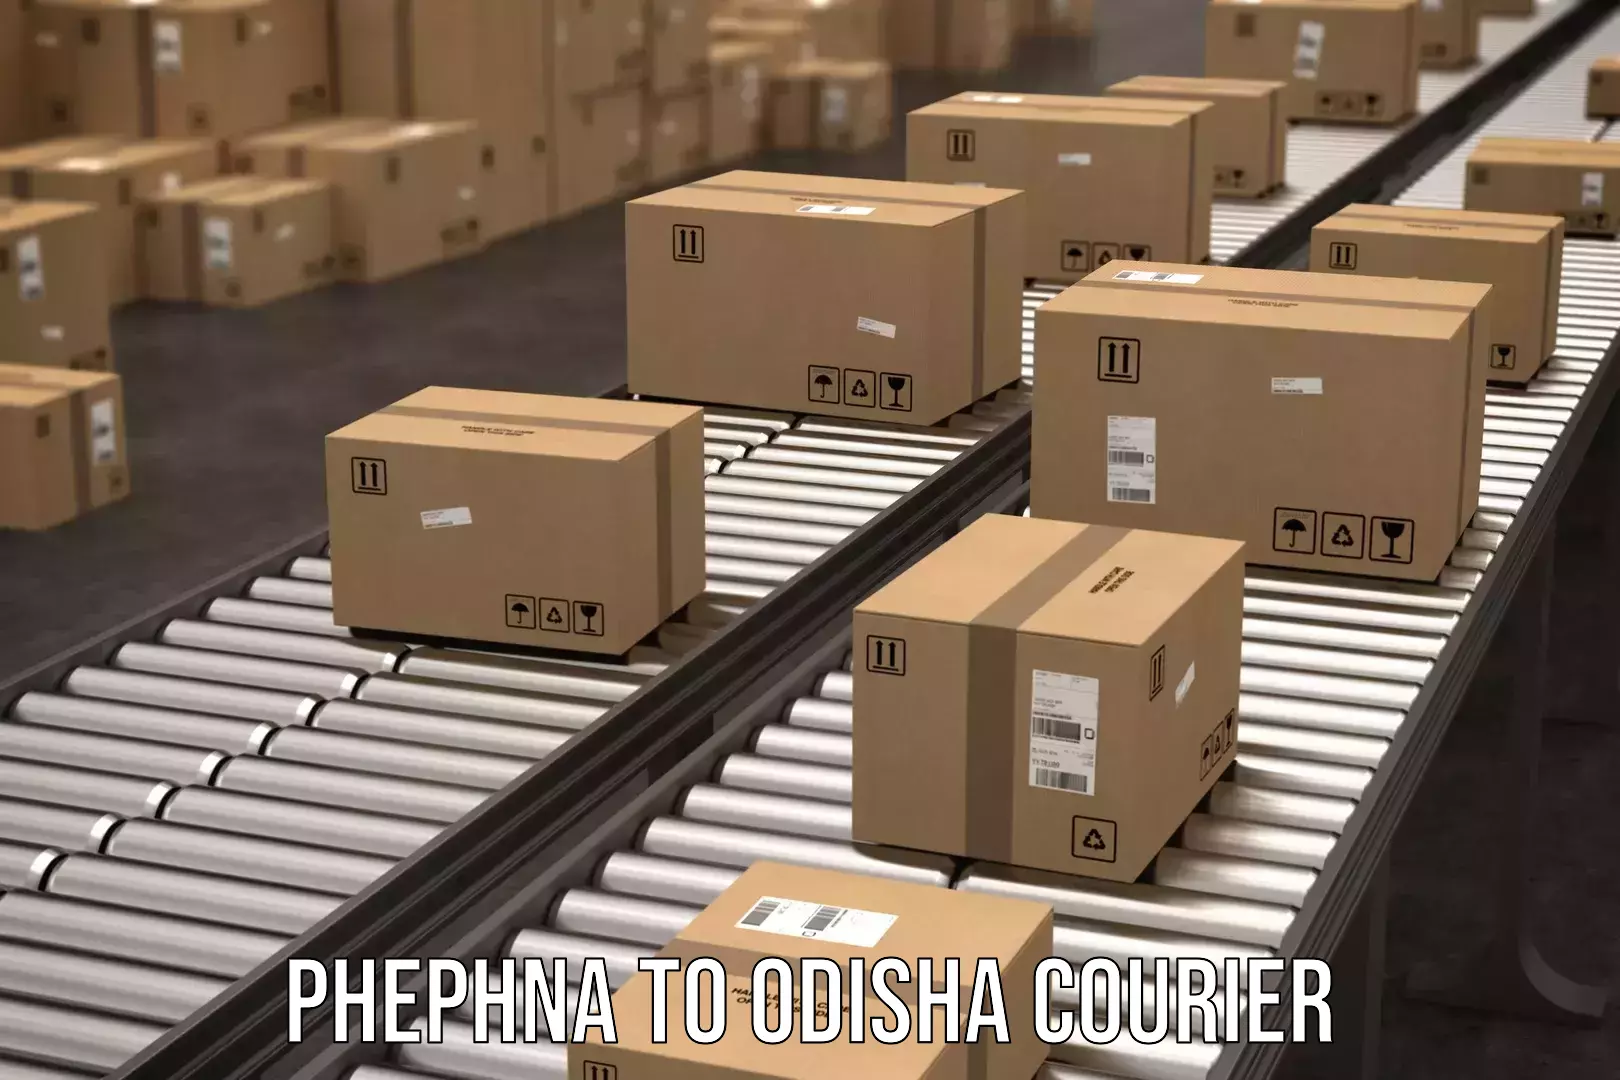 User-friendly delivery service Phephna to Udala